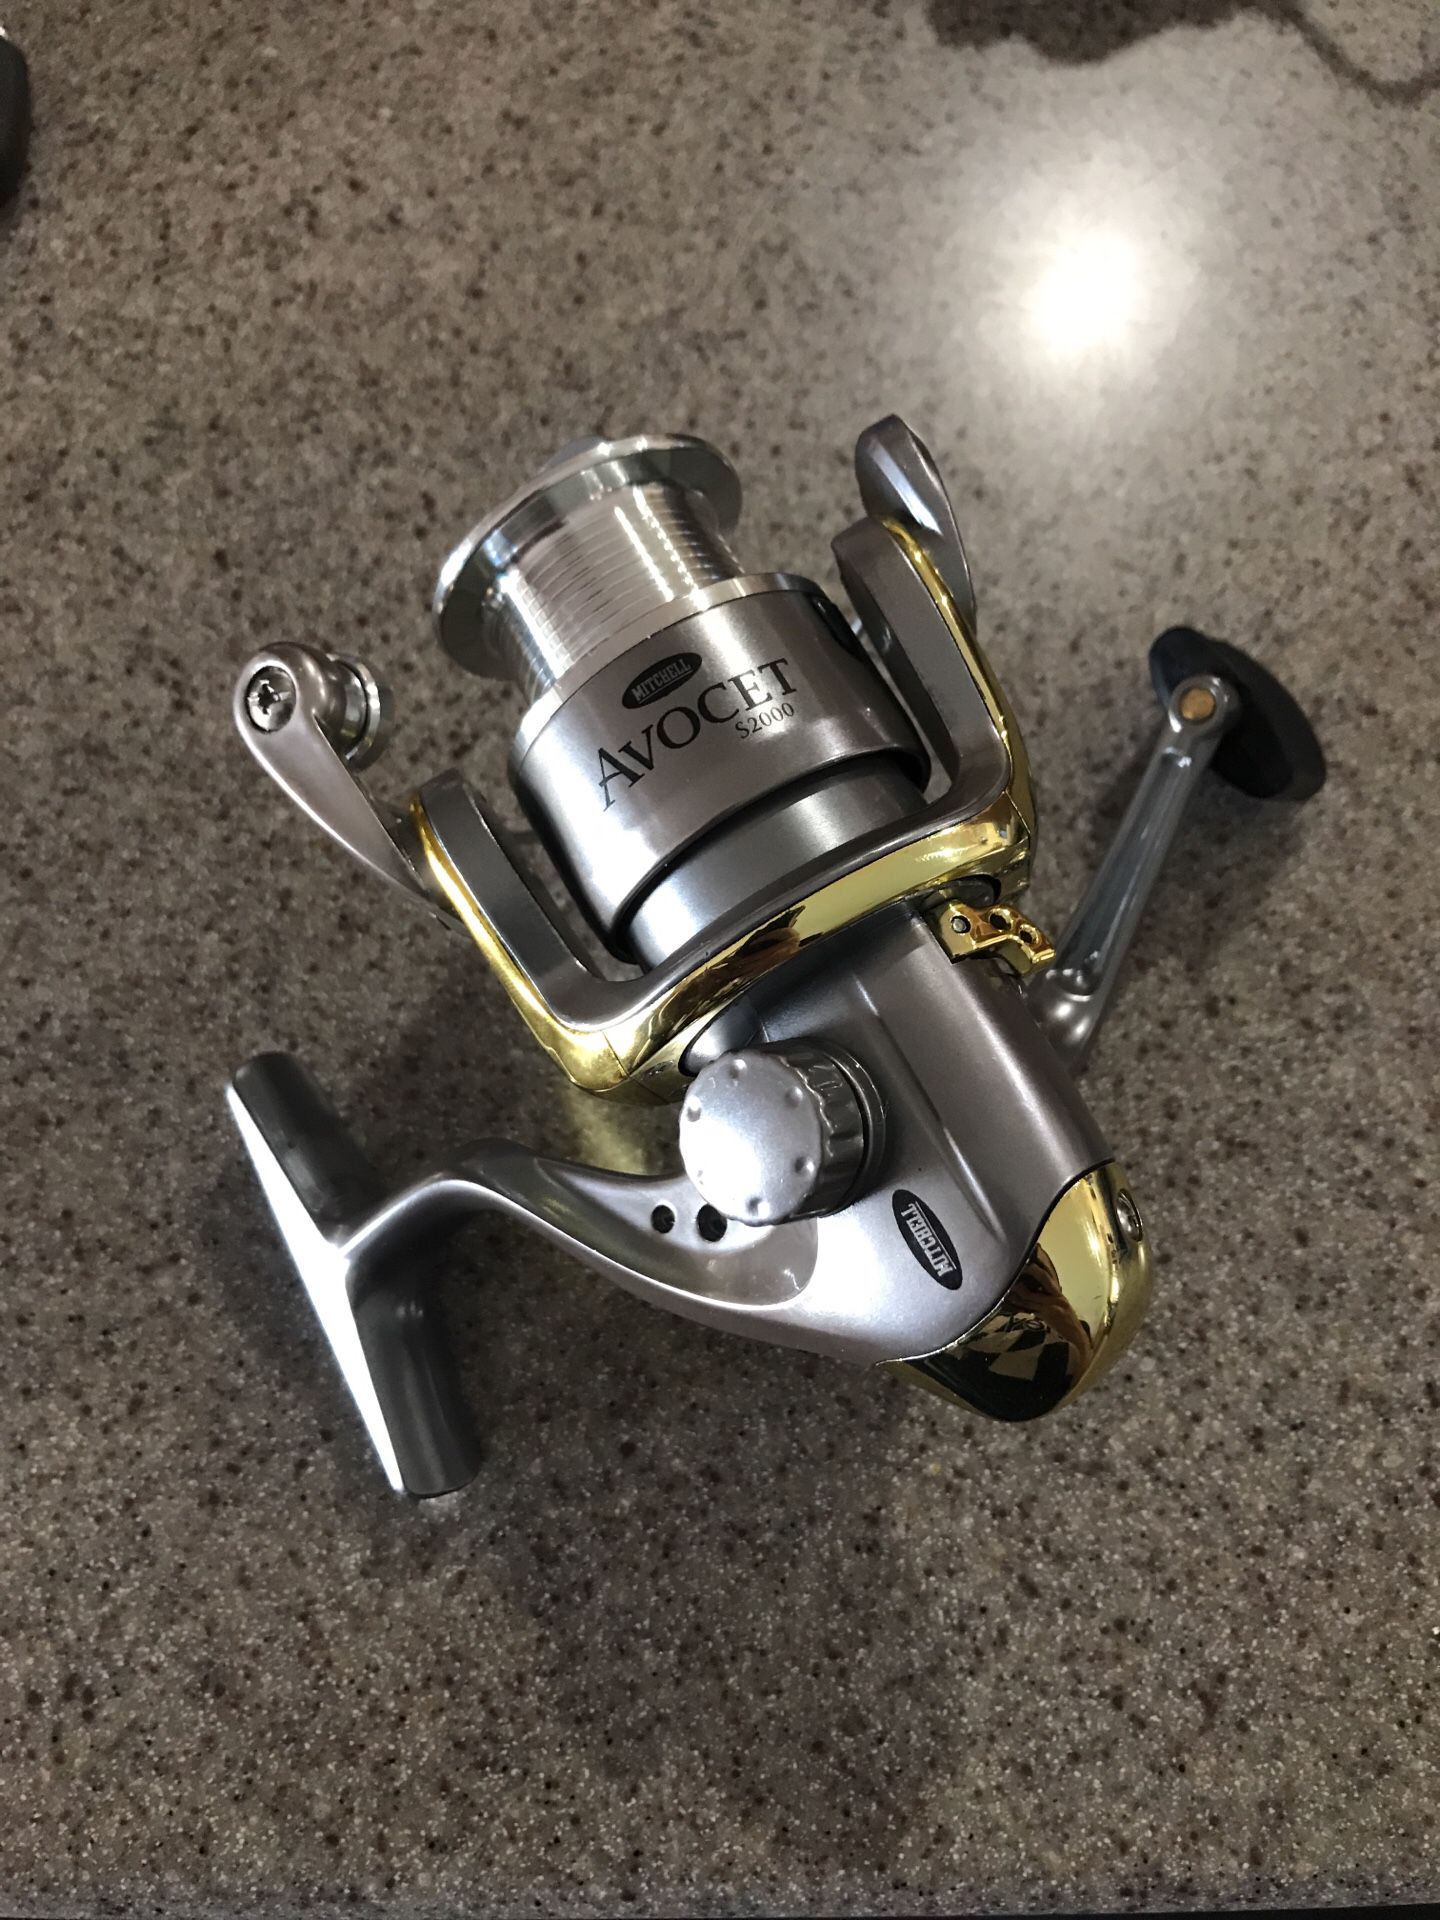 Mitchell Avocet S2000 spinning fishing reel for Sale in Peoria, AZ - OfferUp